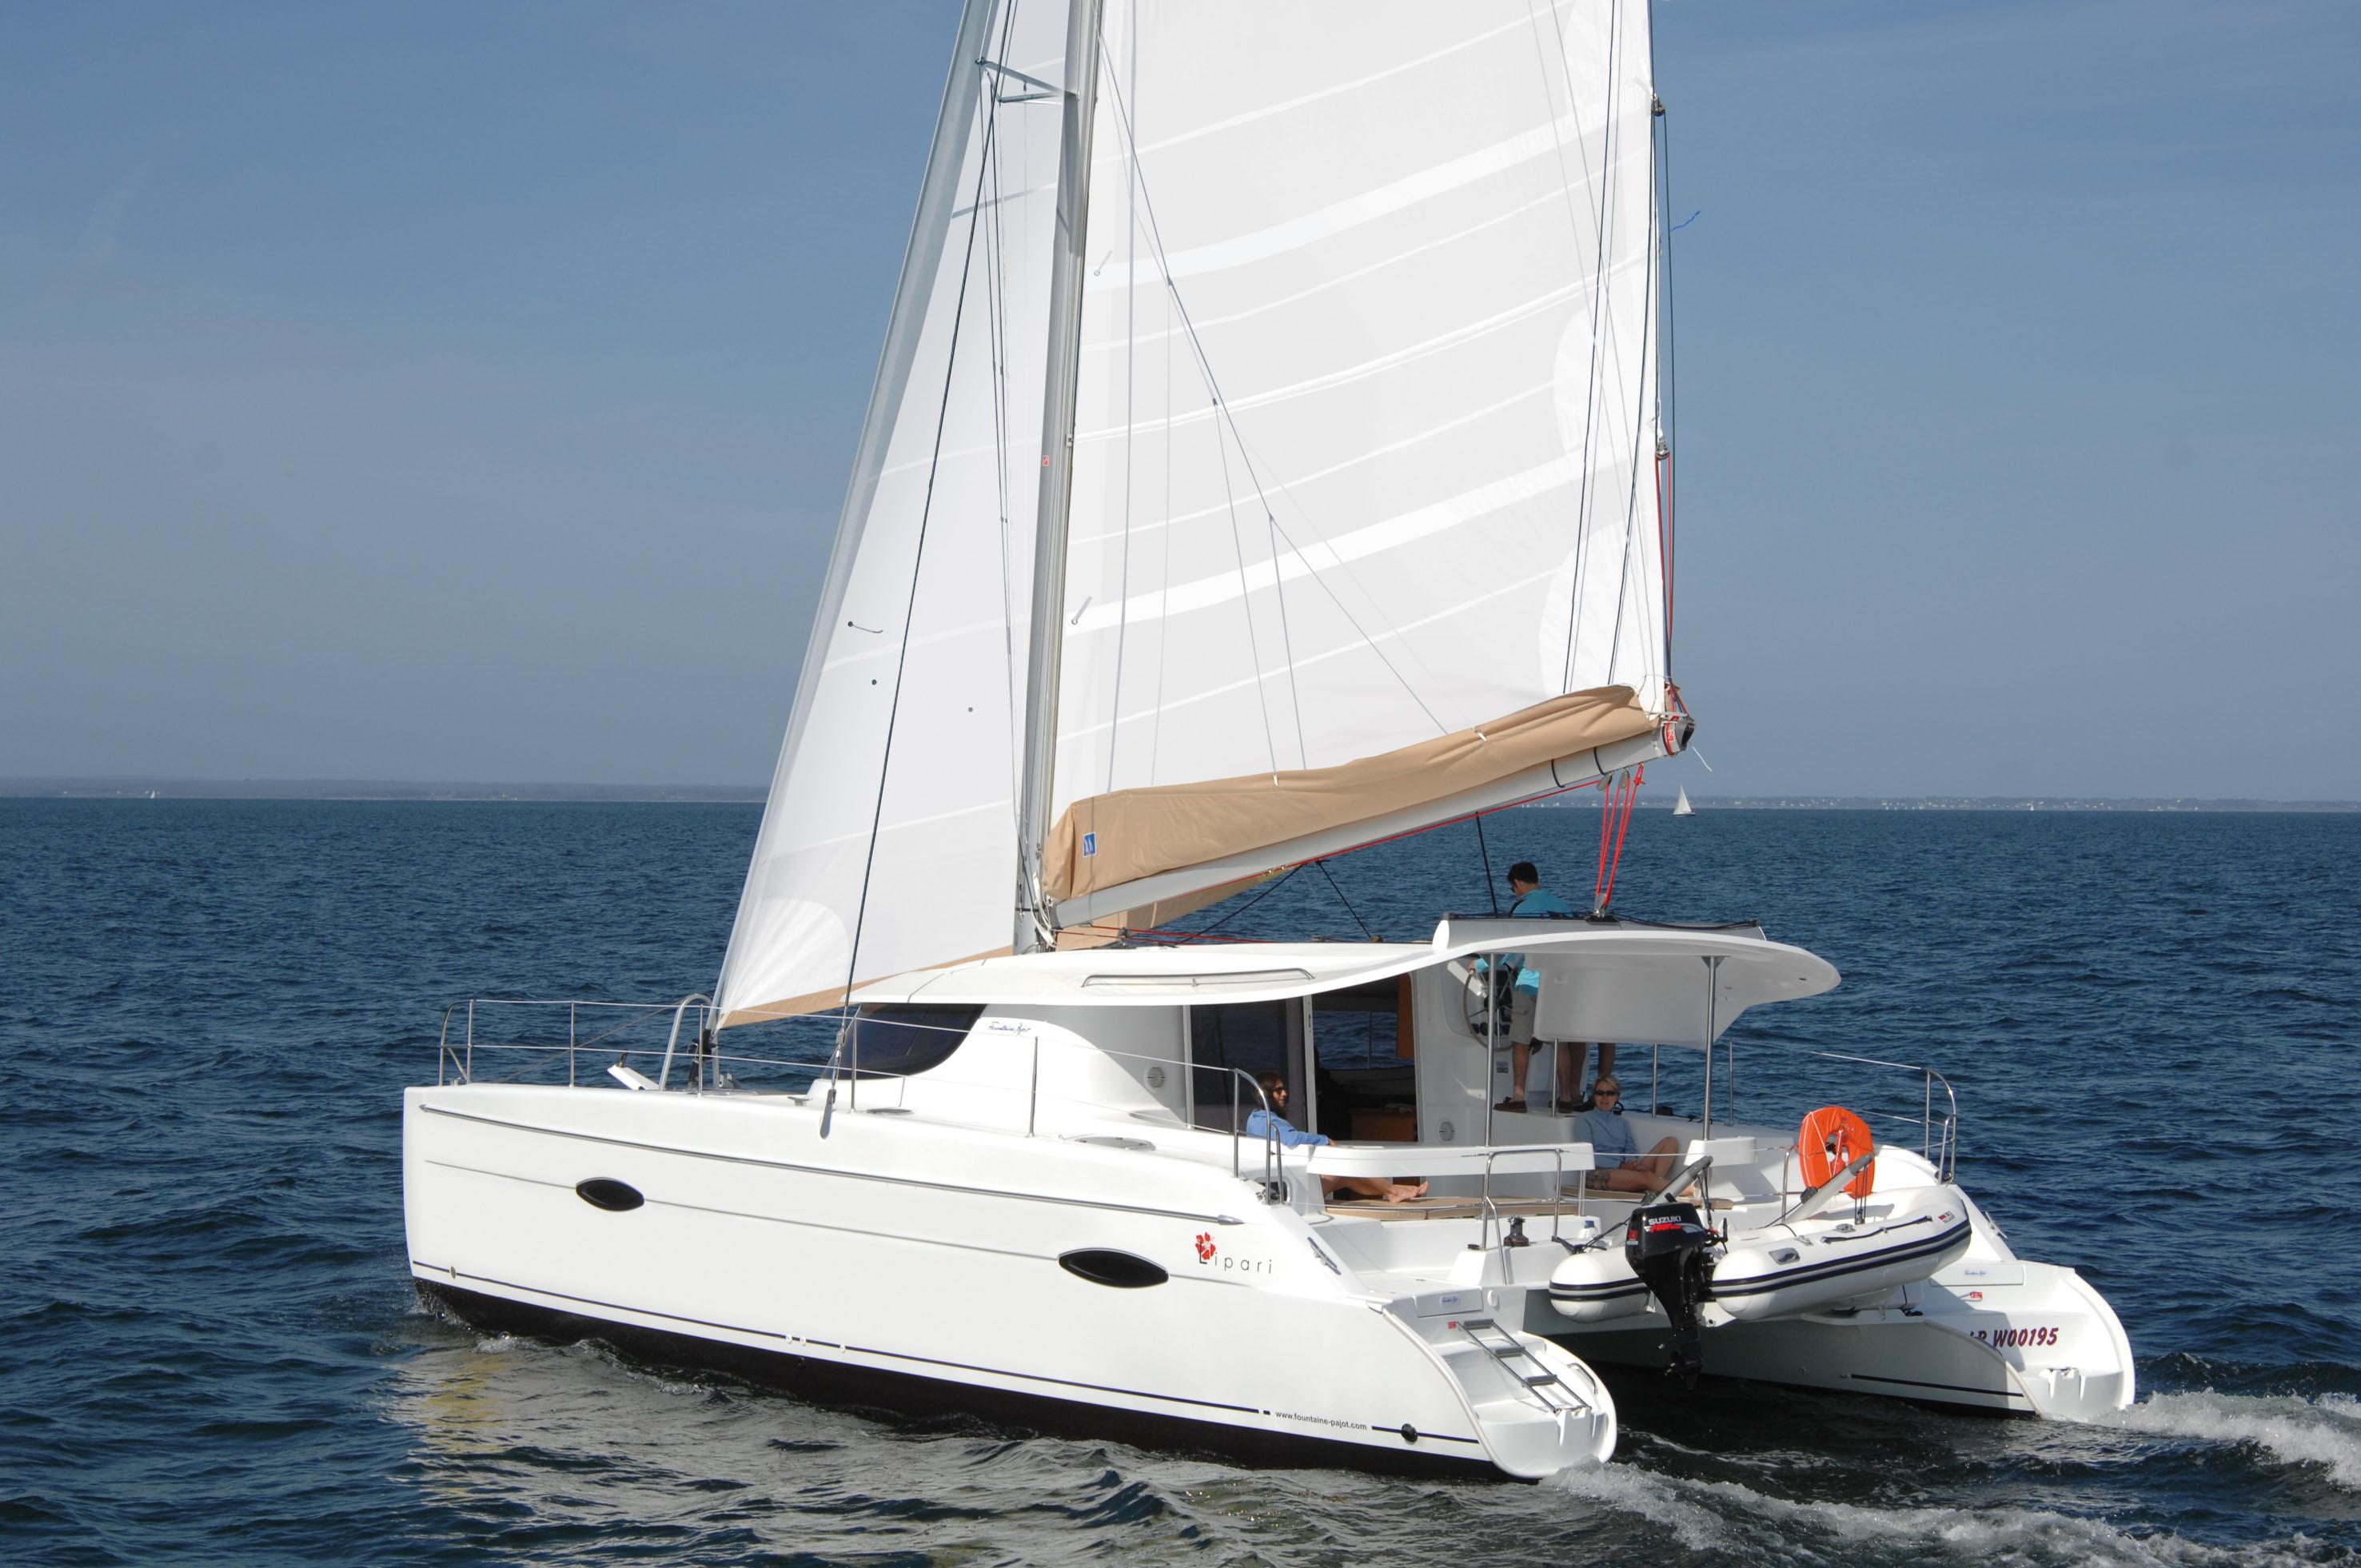 Multihull Solutions to launch new cats at Sanctuary Cove show